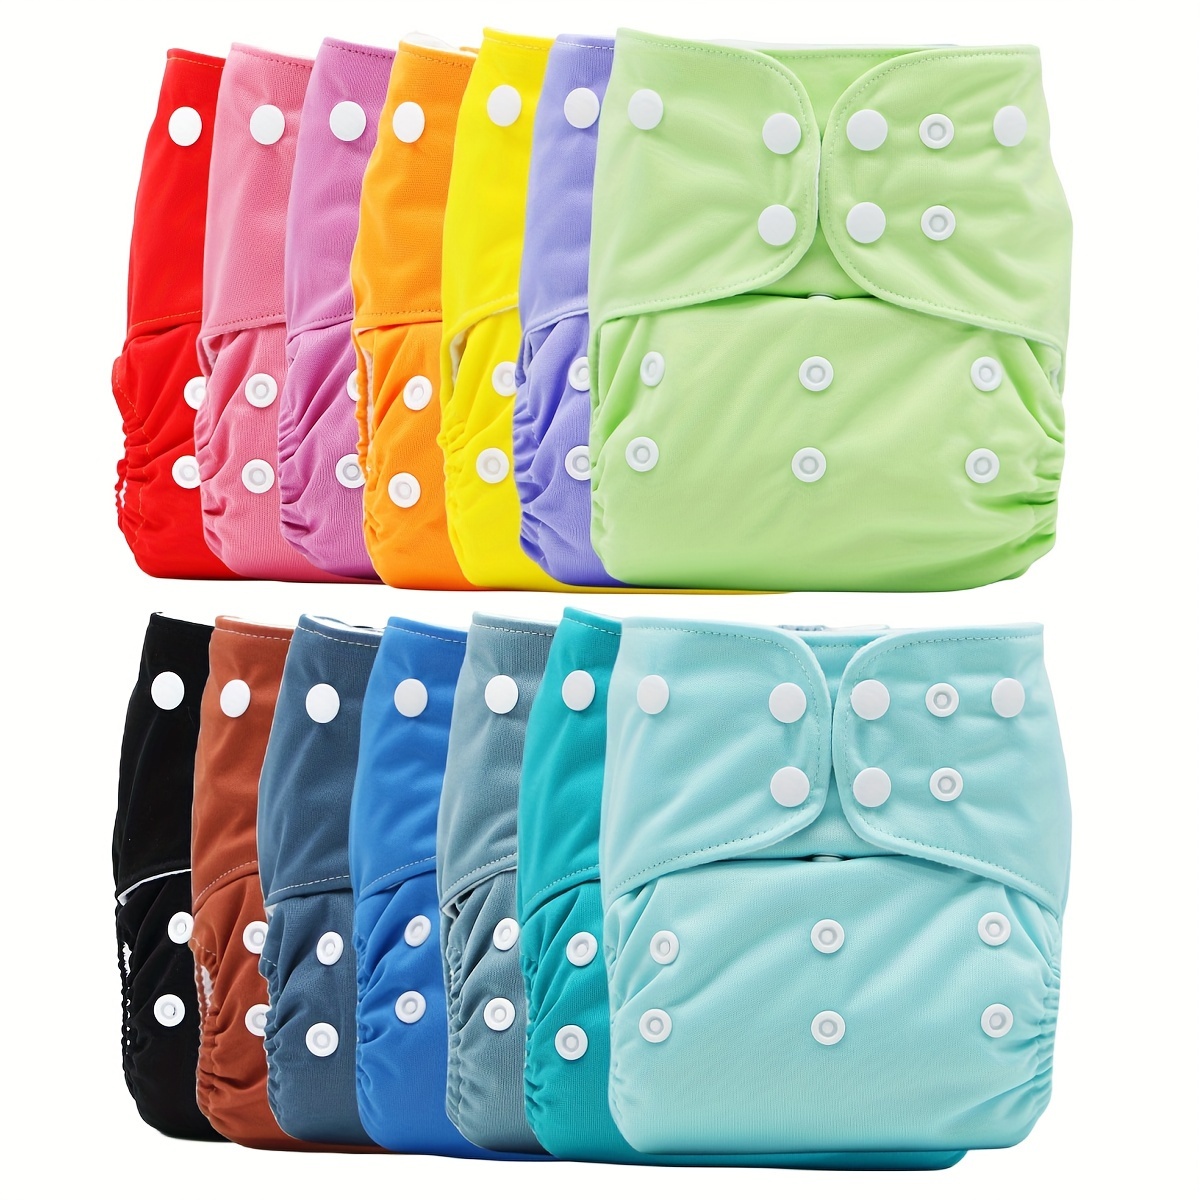 Adult Cloth Diaper Washable Nappy Cover Breathable Lining